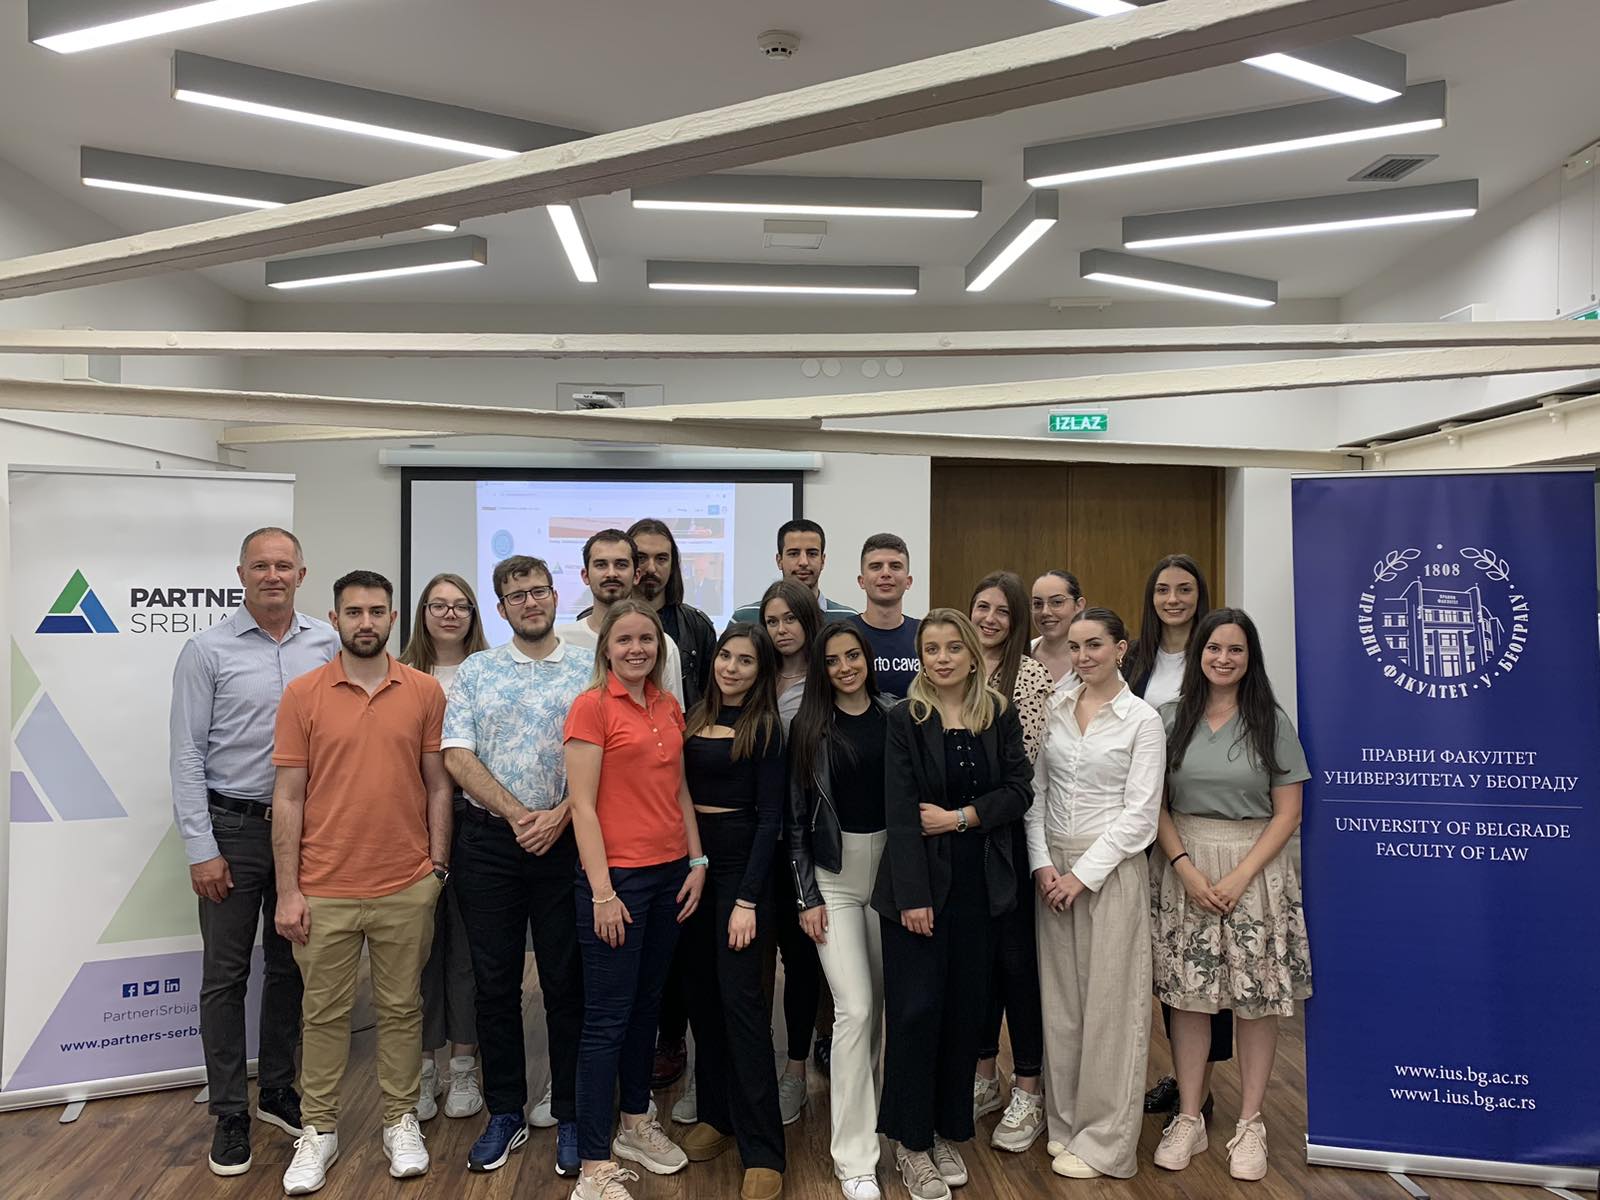 Partners Serbia, in cooperation with the Faculty of Law at the University of Belgrade organized the Second legal clinic for mediation